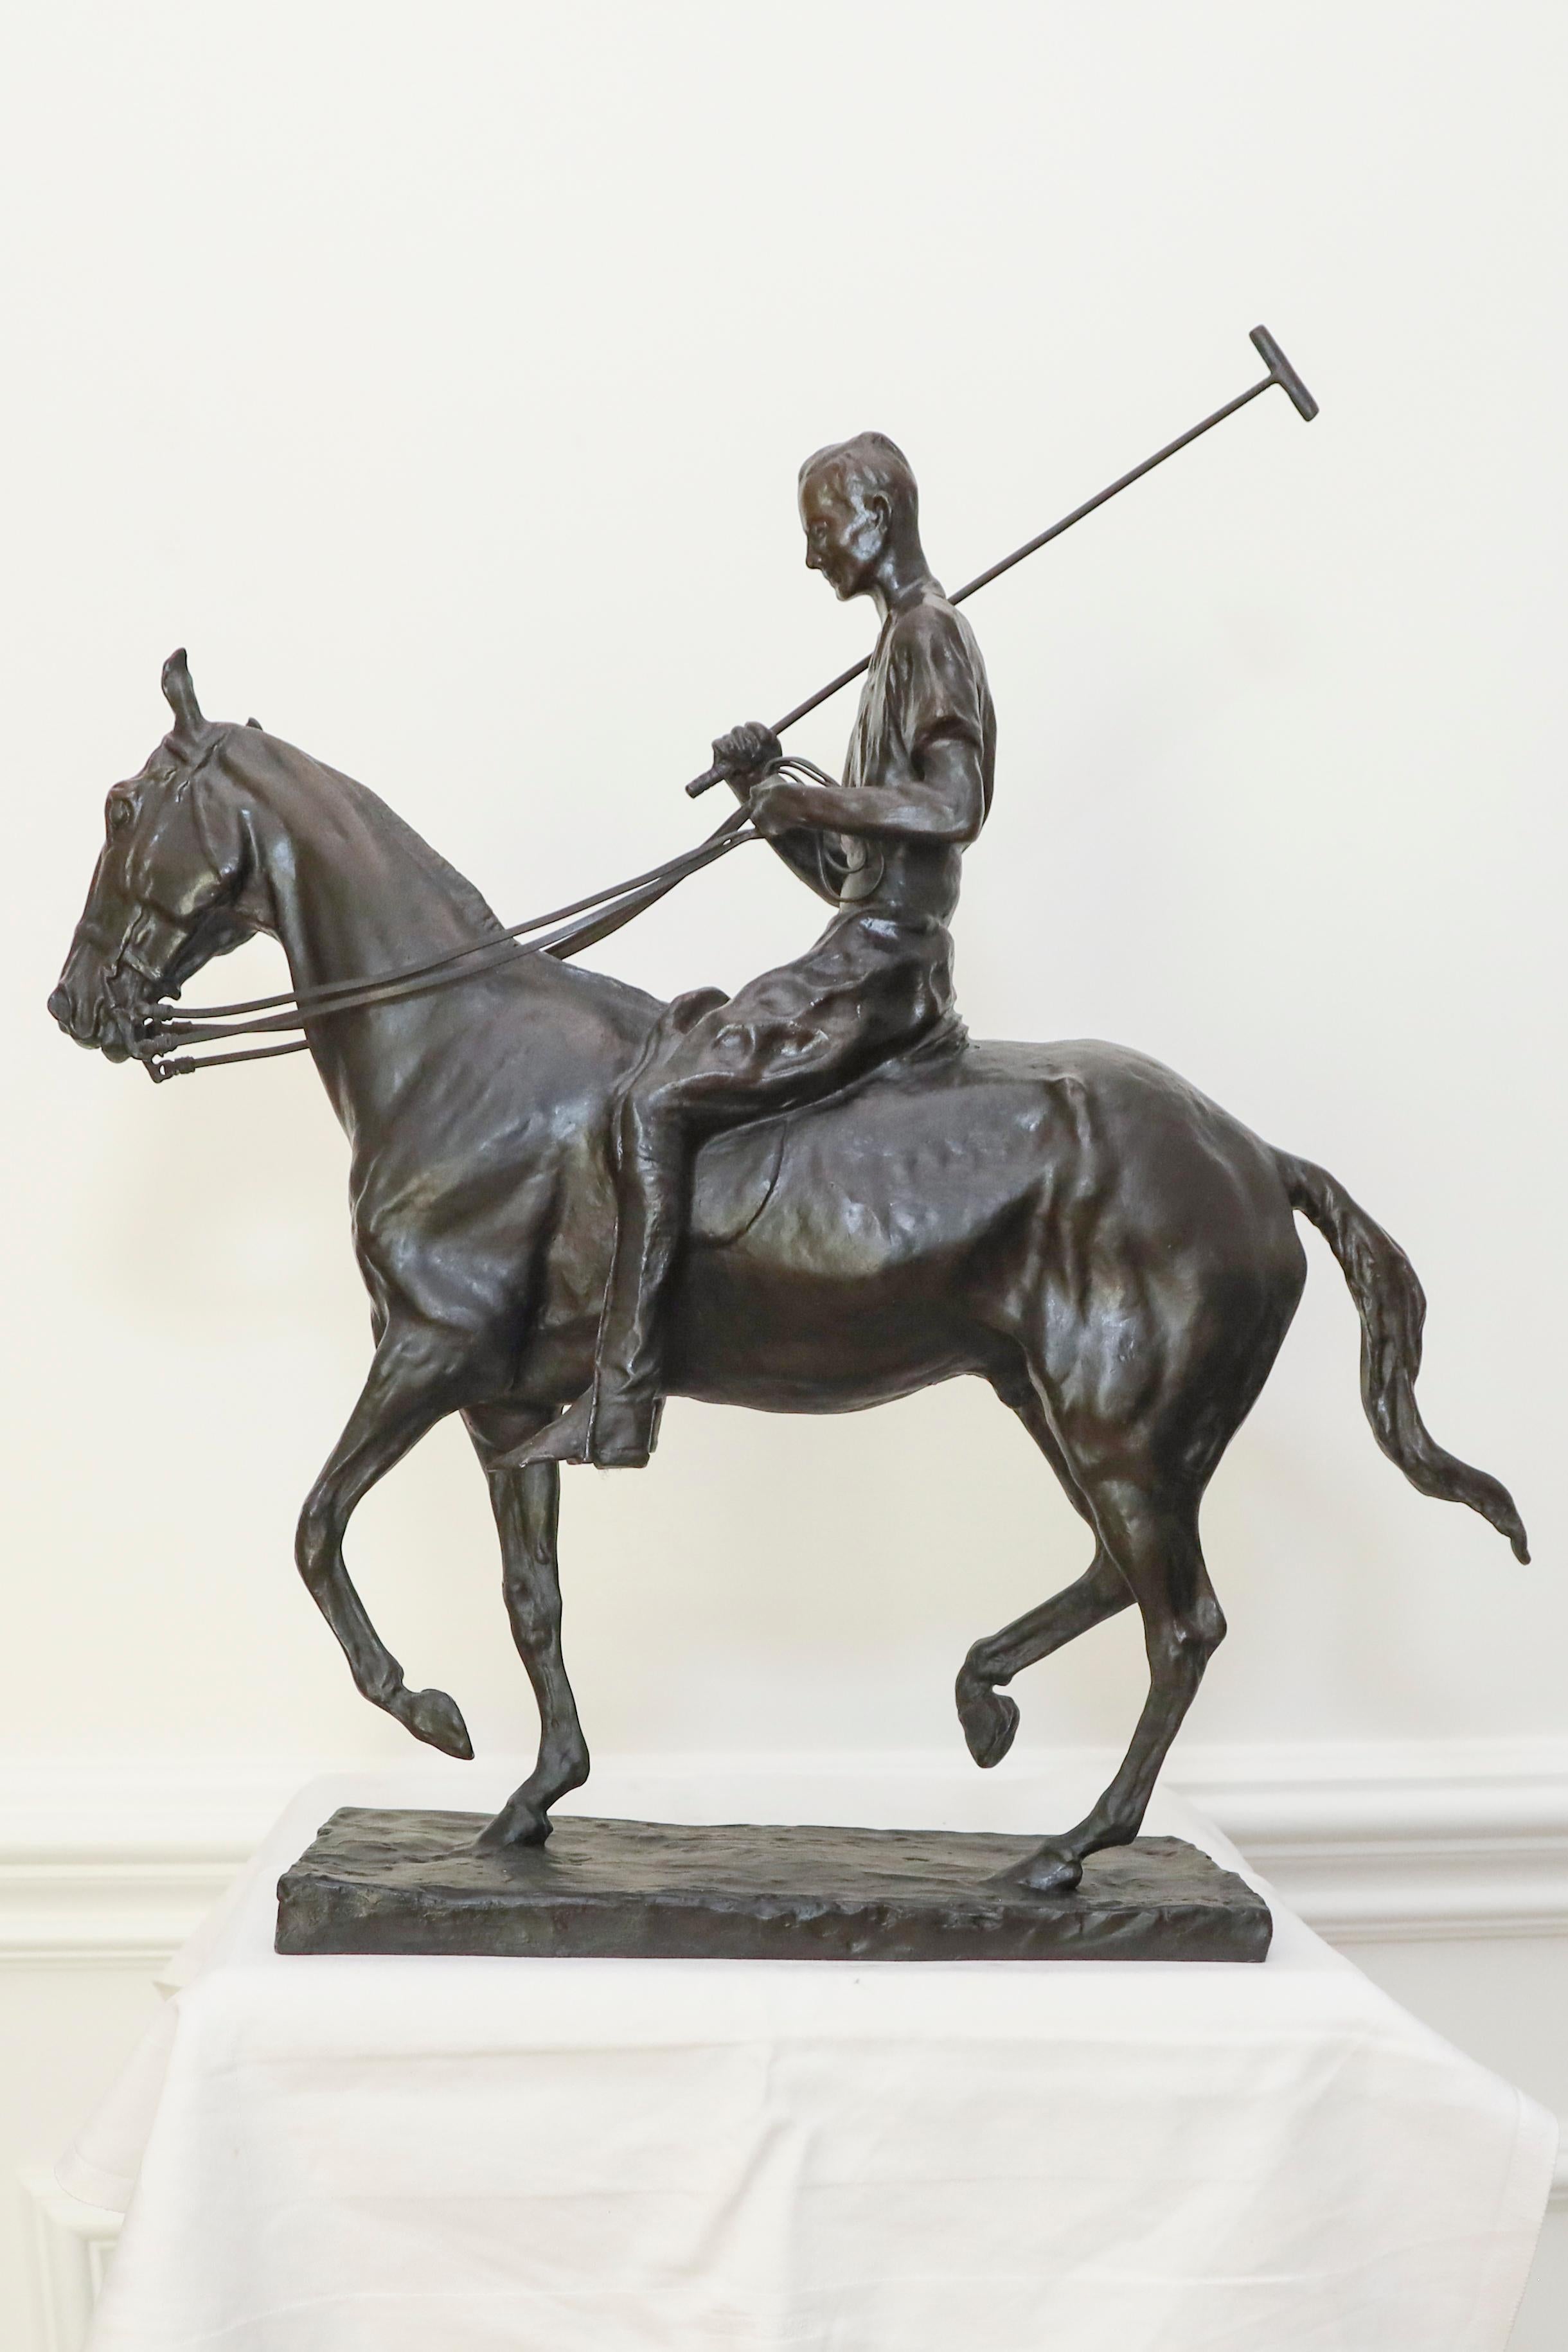  Sculpture of a Polo Player Harrison Tweed by Charles Rumsey - Gold Still-Life Sculpture by Charles Cary Rumsey